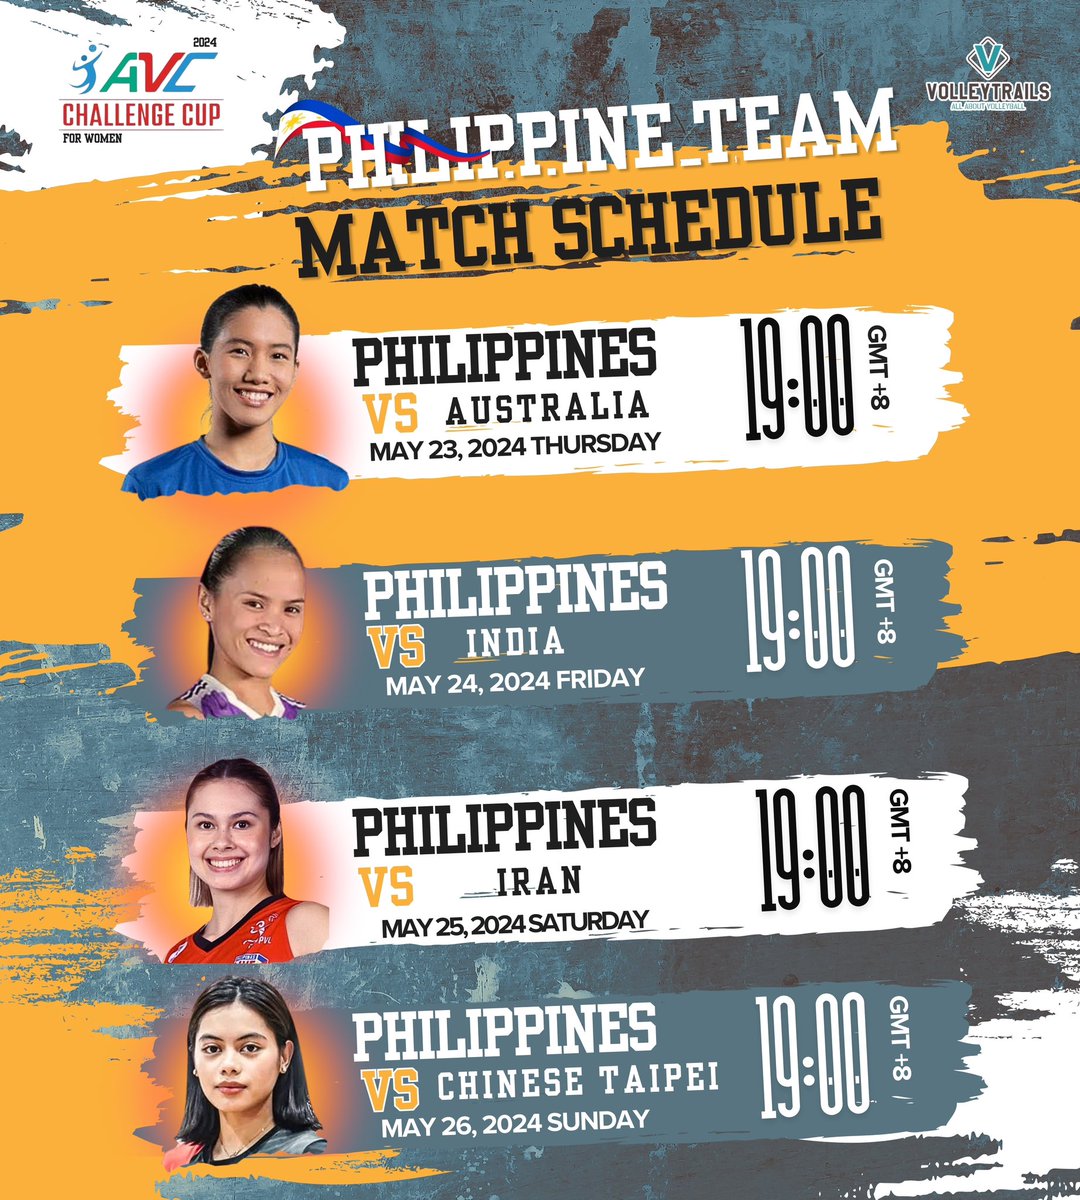 🇵🇭 Philippines’ Preliminary Round Match Schedule in the 2024 AVC Challenge Cup for Women. #AVCChallengeCup